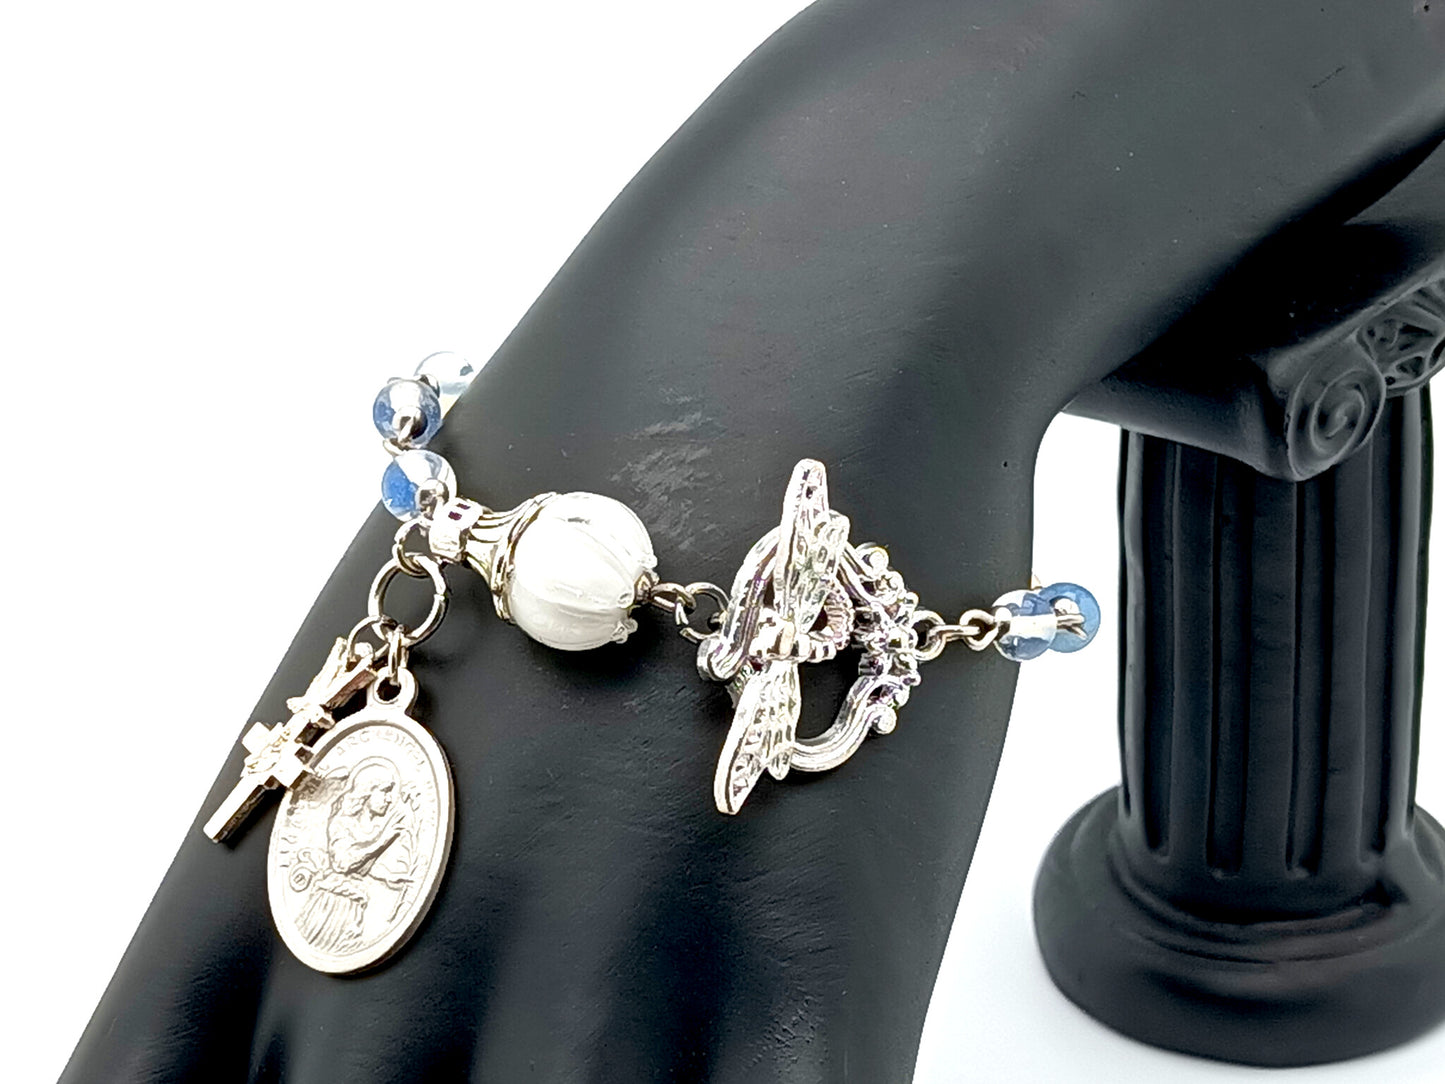 Saint Gabriel Archangel unique rosary beads single decade rosary bracelet with opal gemstone beads and dragonfly clasp and Holy Spirit cross.